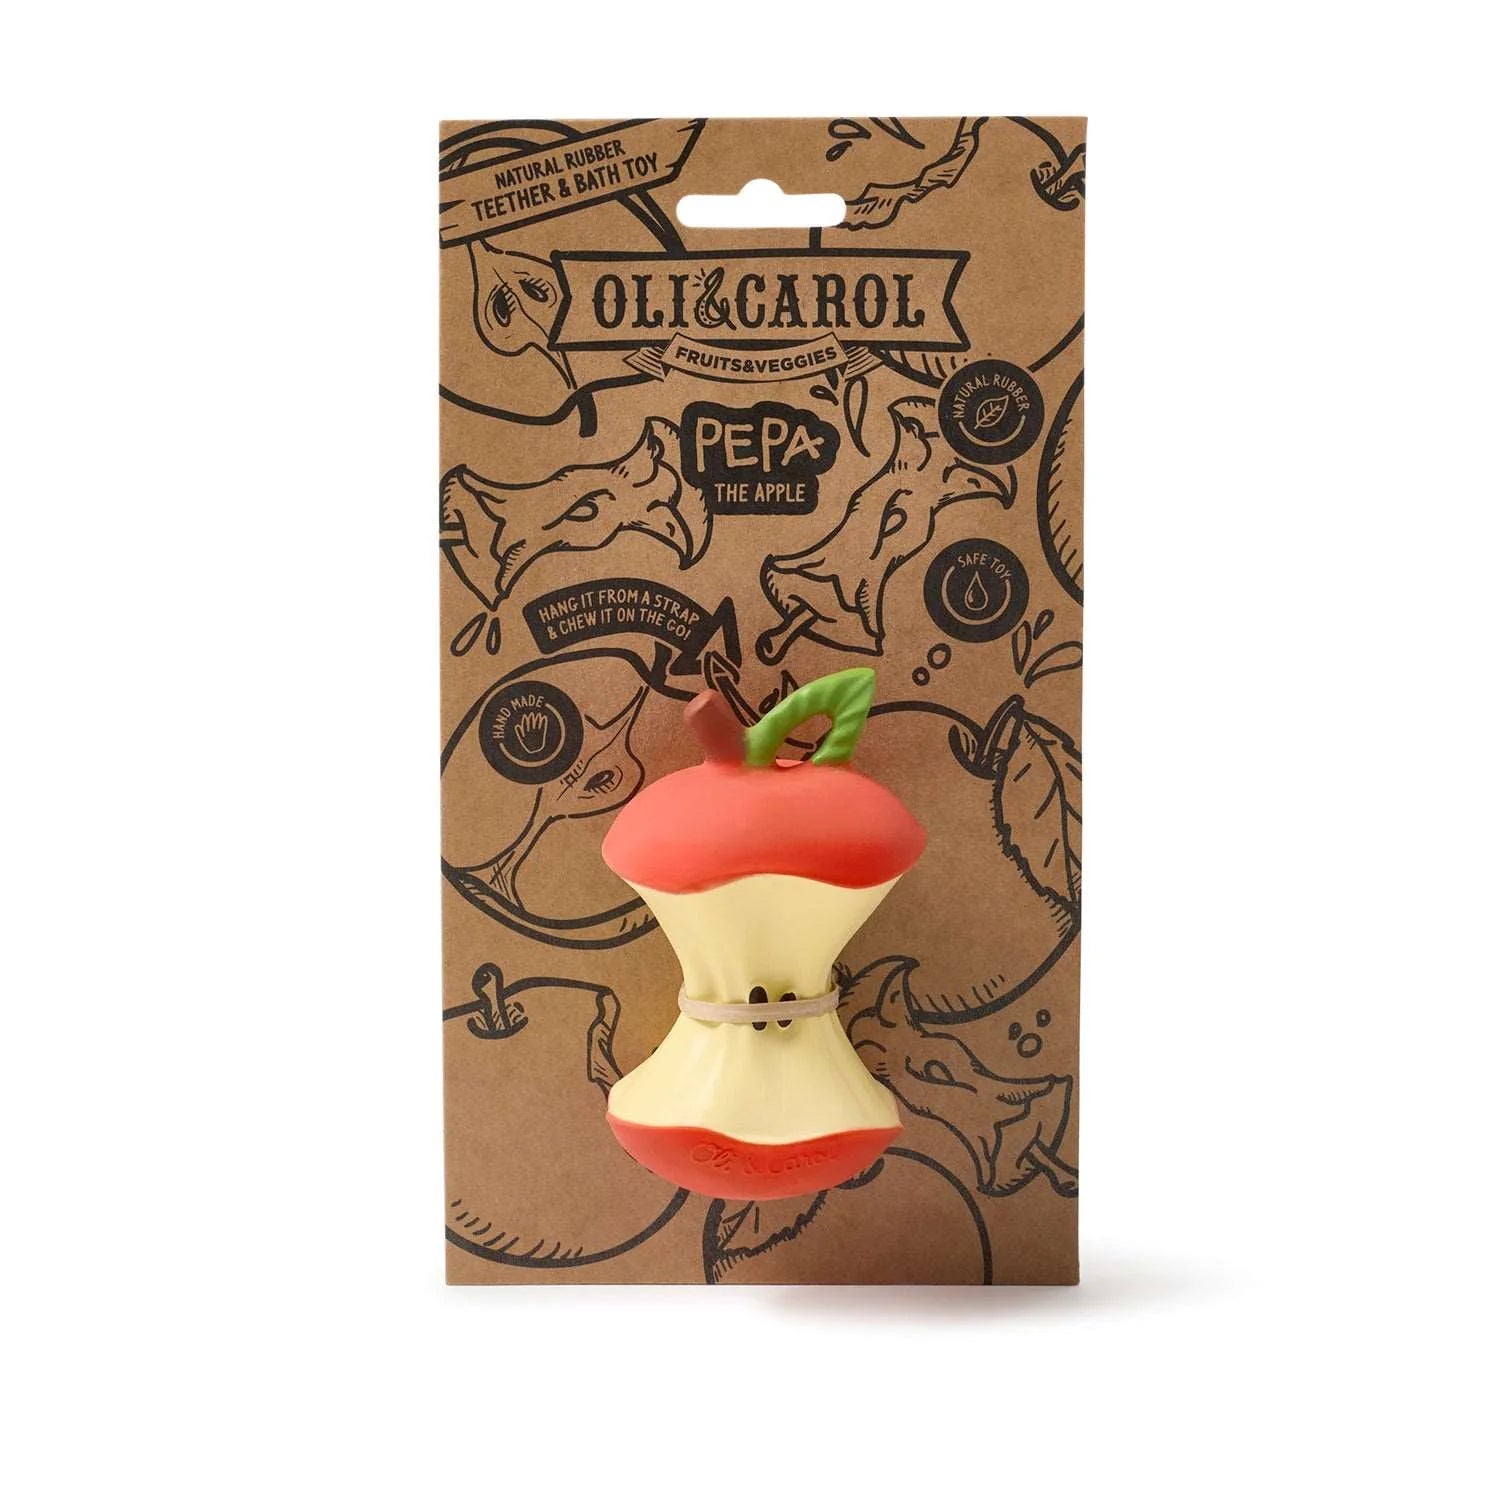 Toys Games and Puzzles Oli & Carol Pepa The Apple by Weirs of Baggot Street